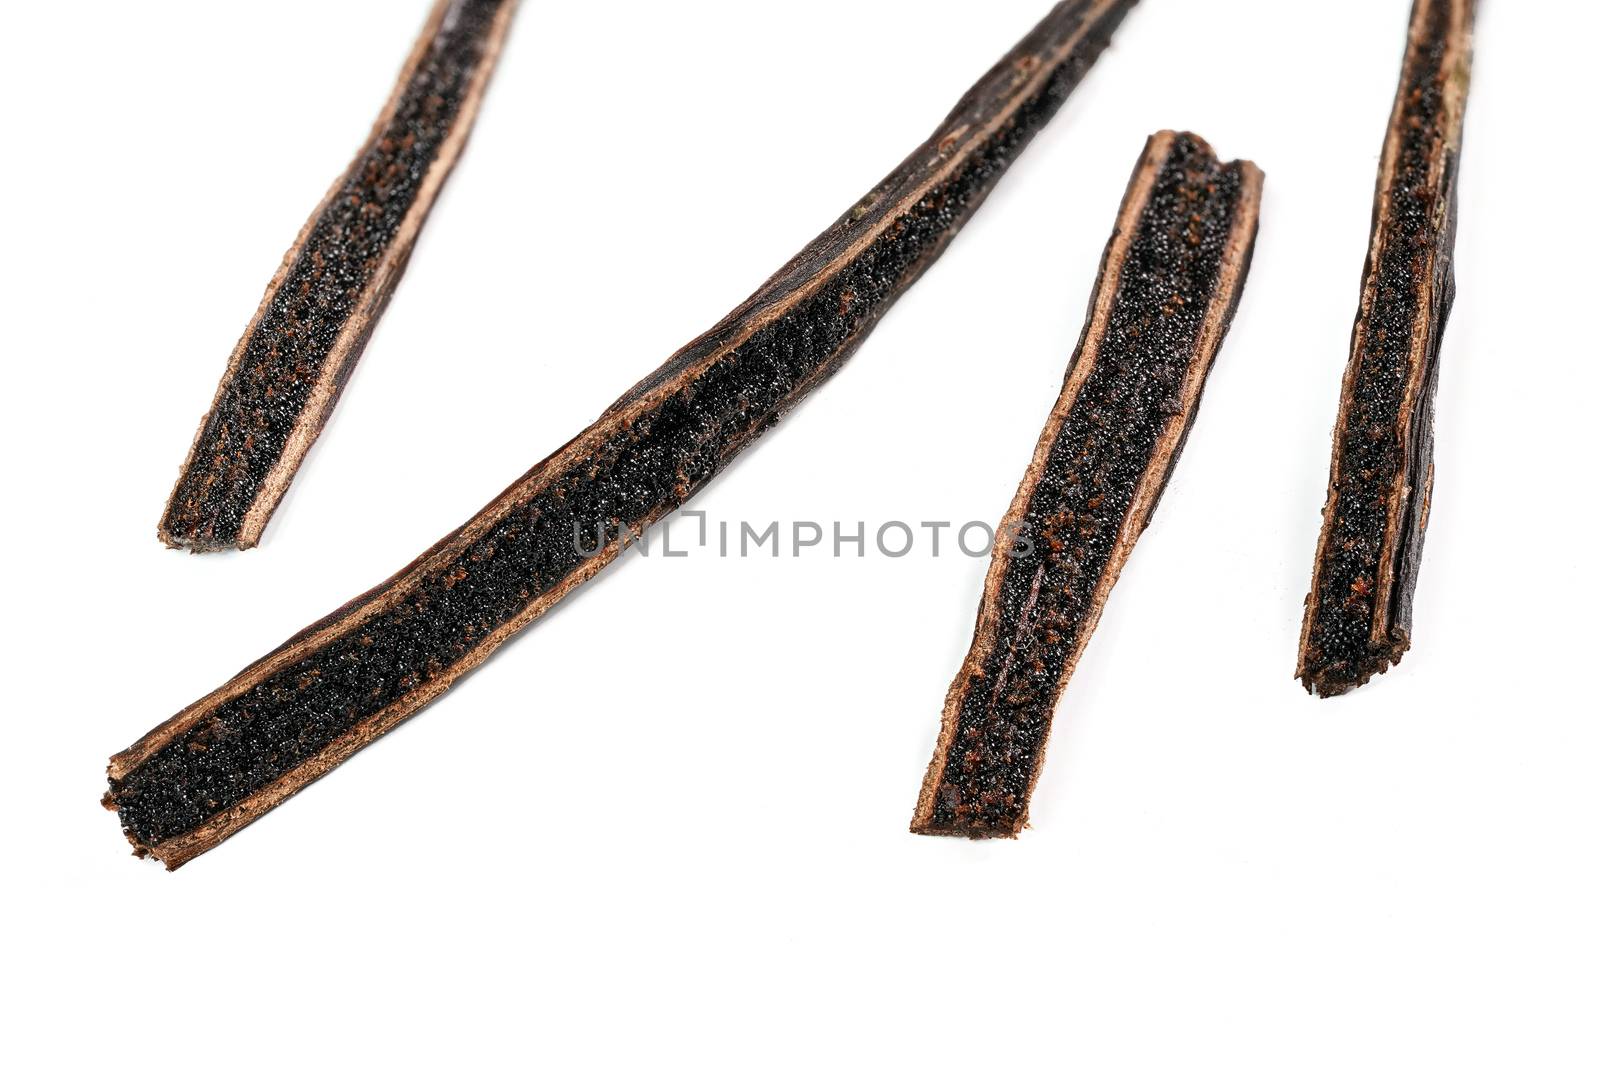 Vanilla pods cut with knife, black seeds visible, closeup macro detail photo isolated on white background.